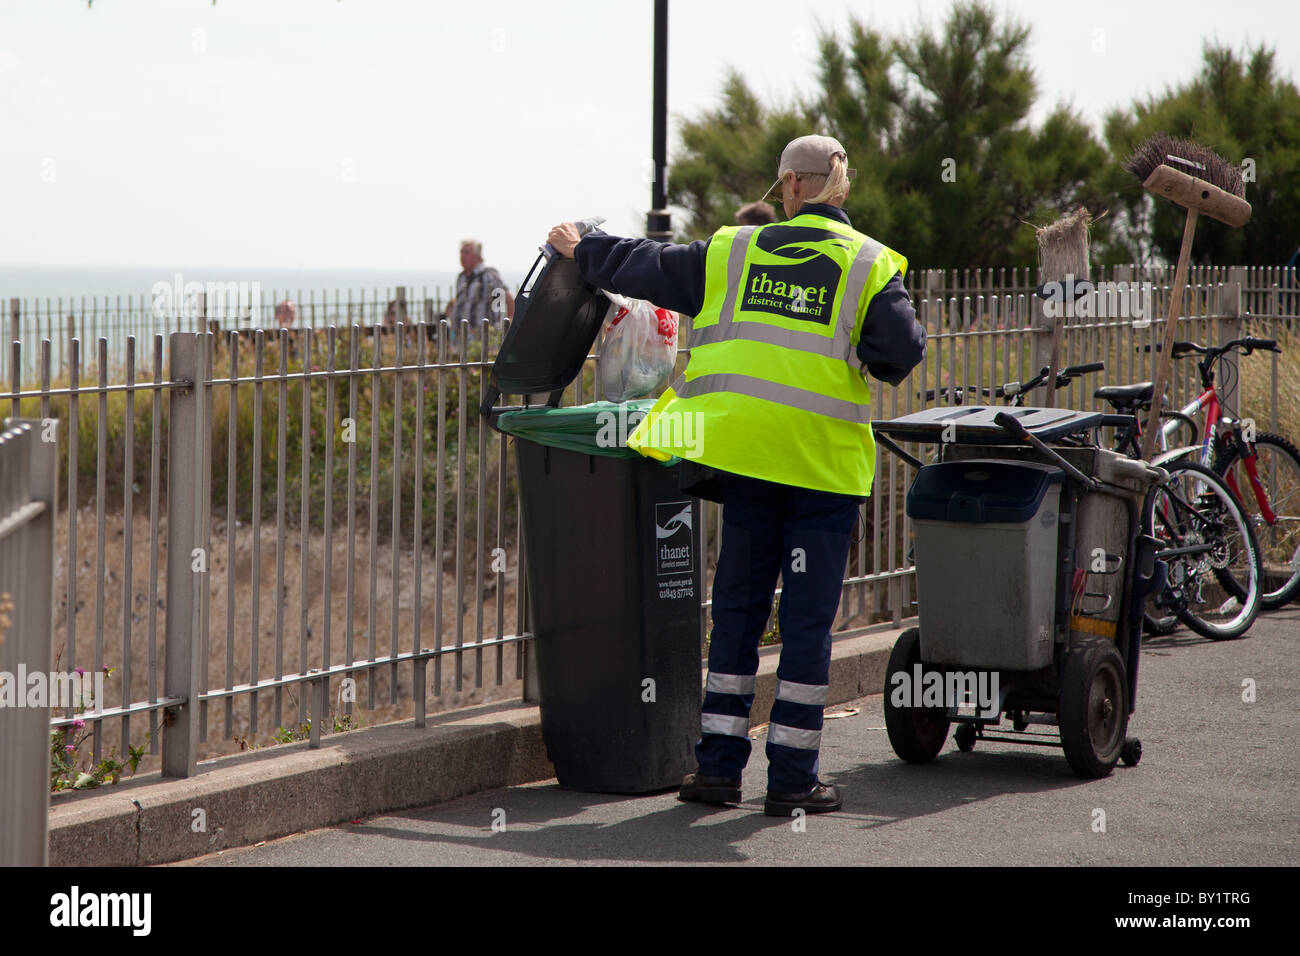 Council worker emptying bins Stock Photo